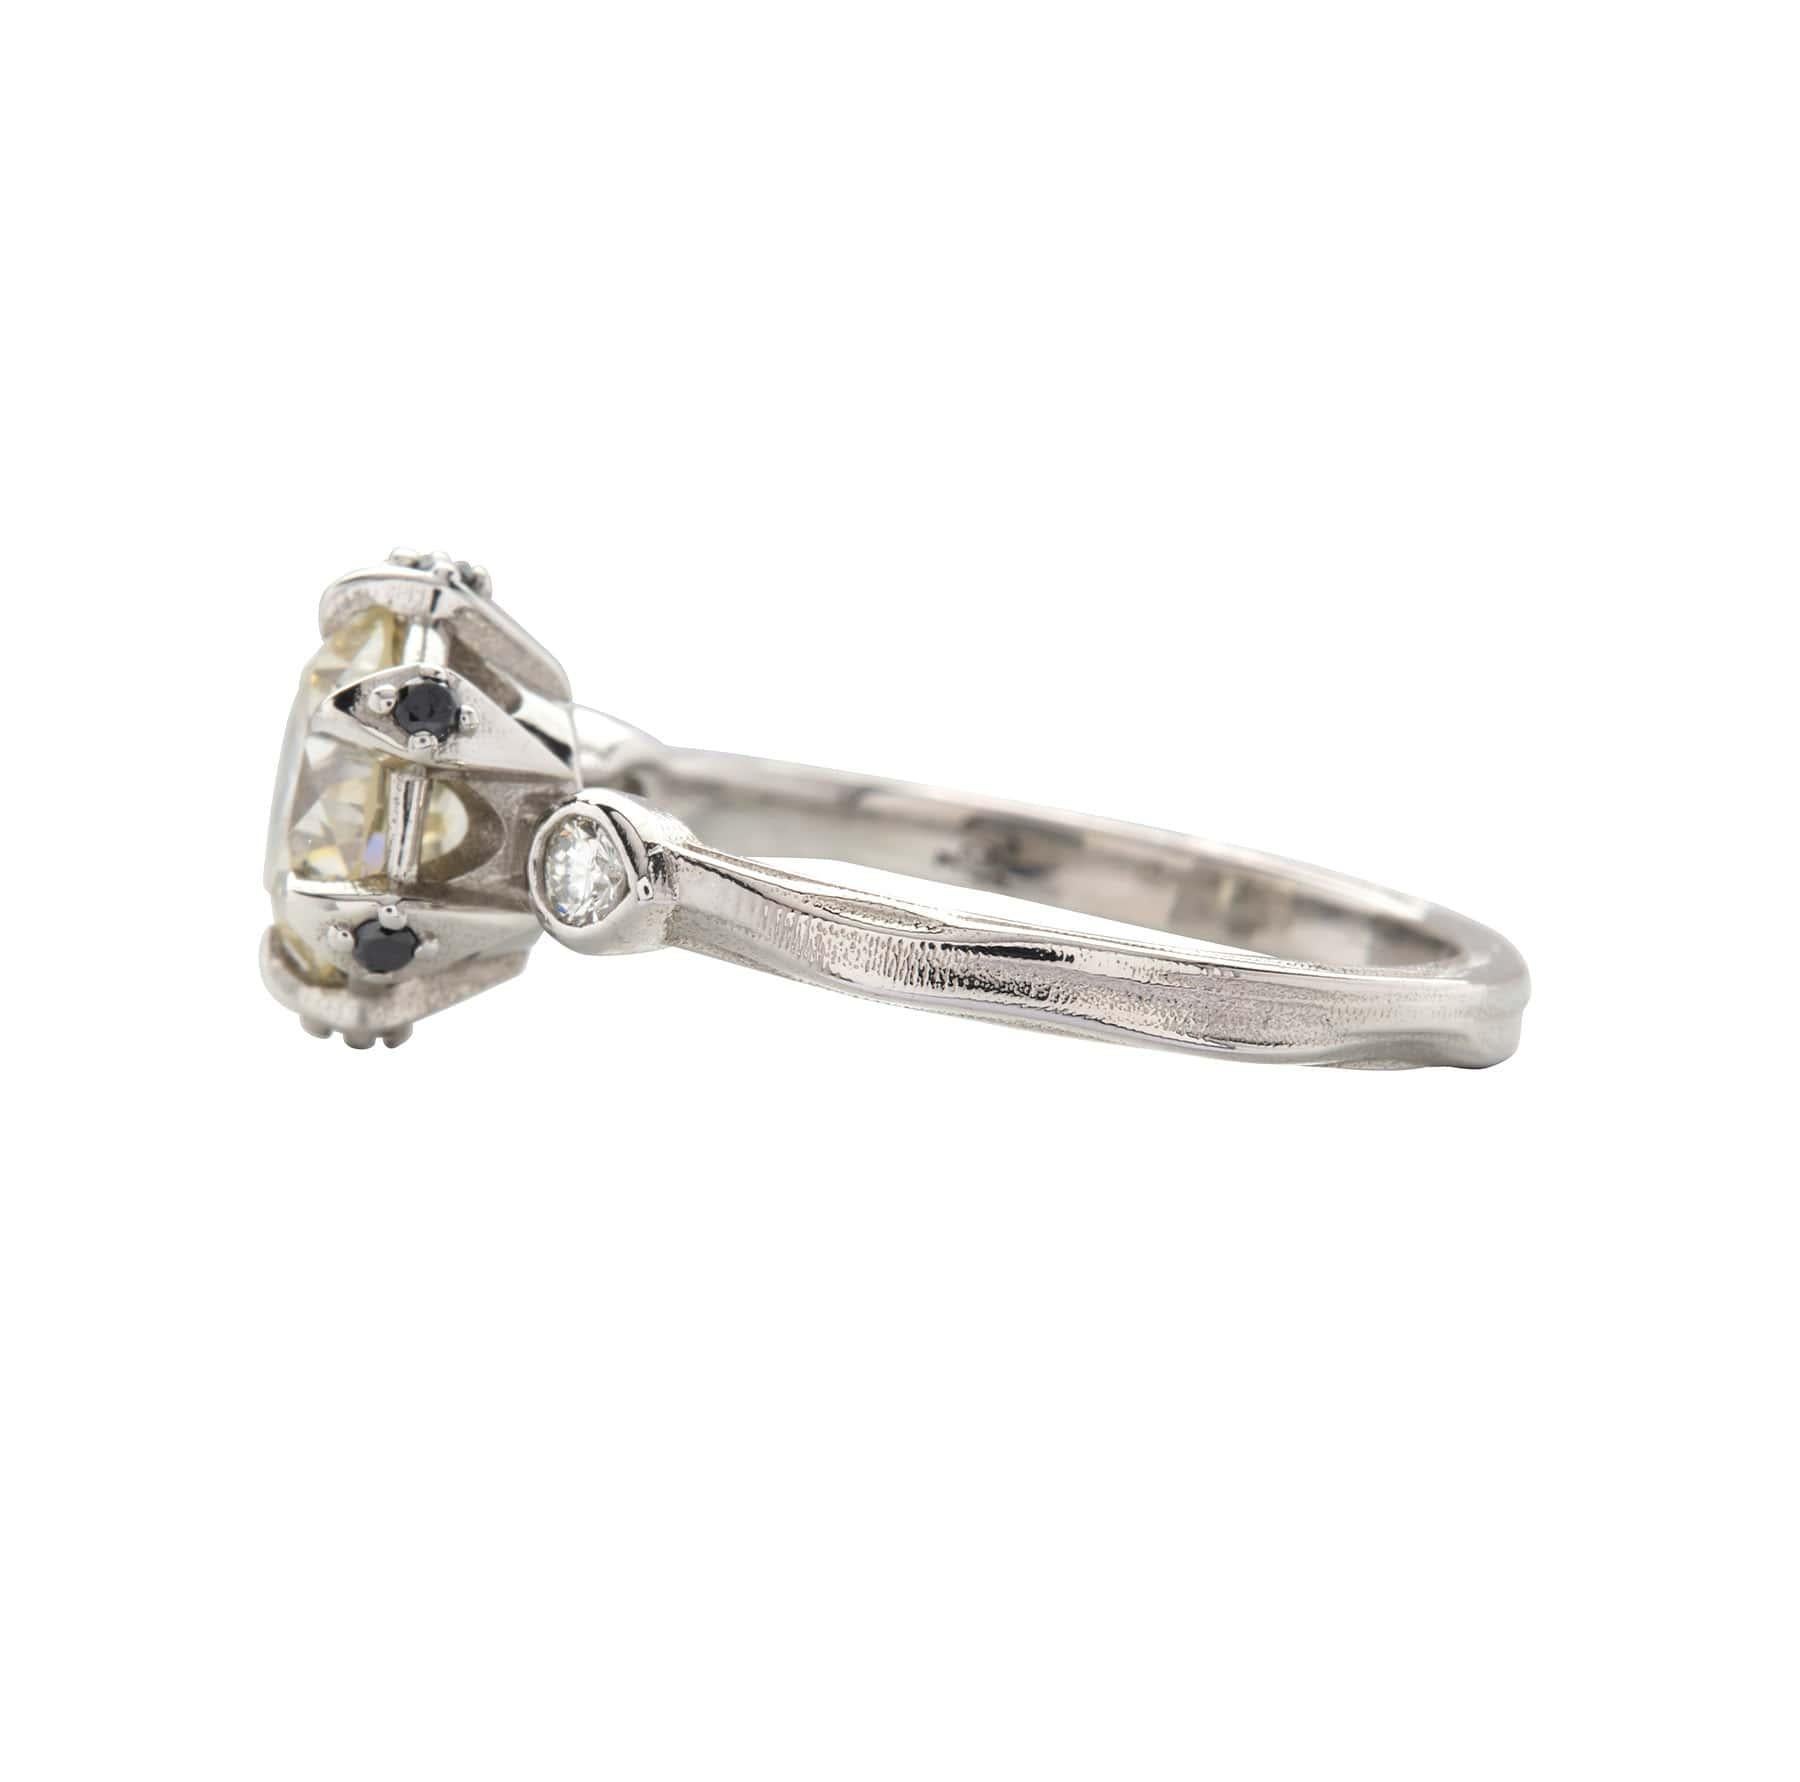 A one-of-a-kind GIA-certified 7mm Old European Style Round Brilliant Cut Diamond with amazing VVS1 clarity has a subtle hue of color, graded O-P.  This center stone is set in a platinum setting that forms the shape of a crown with 6 black